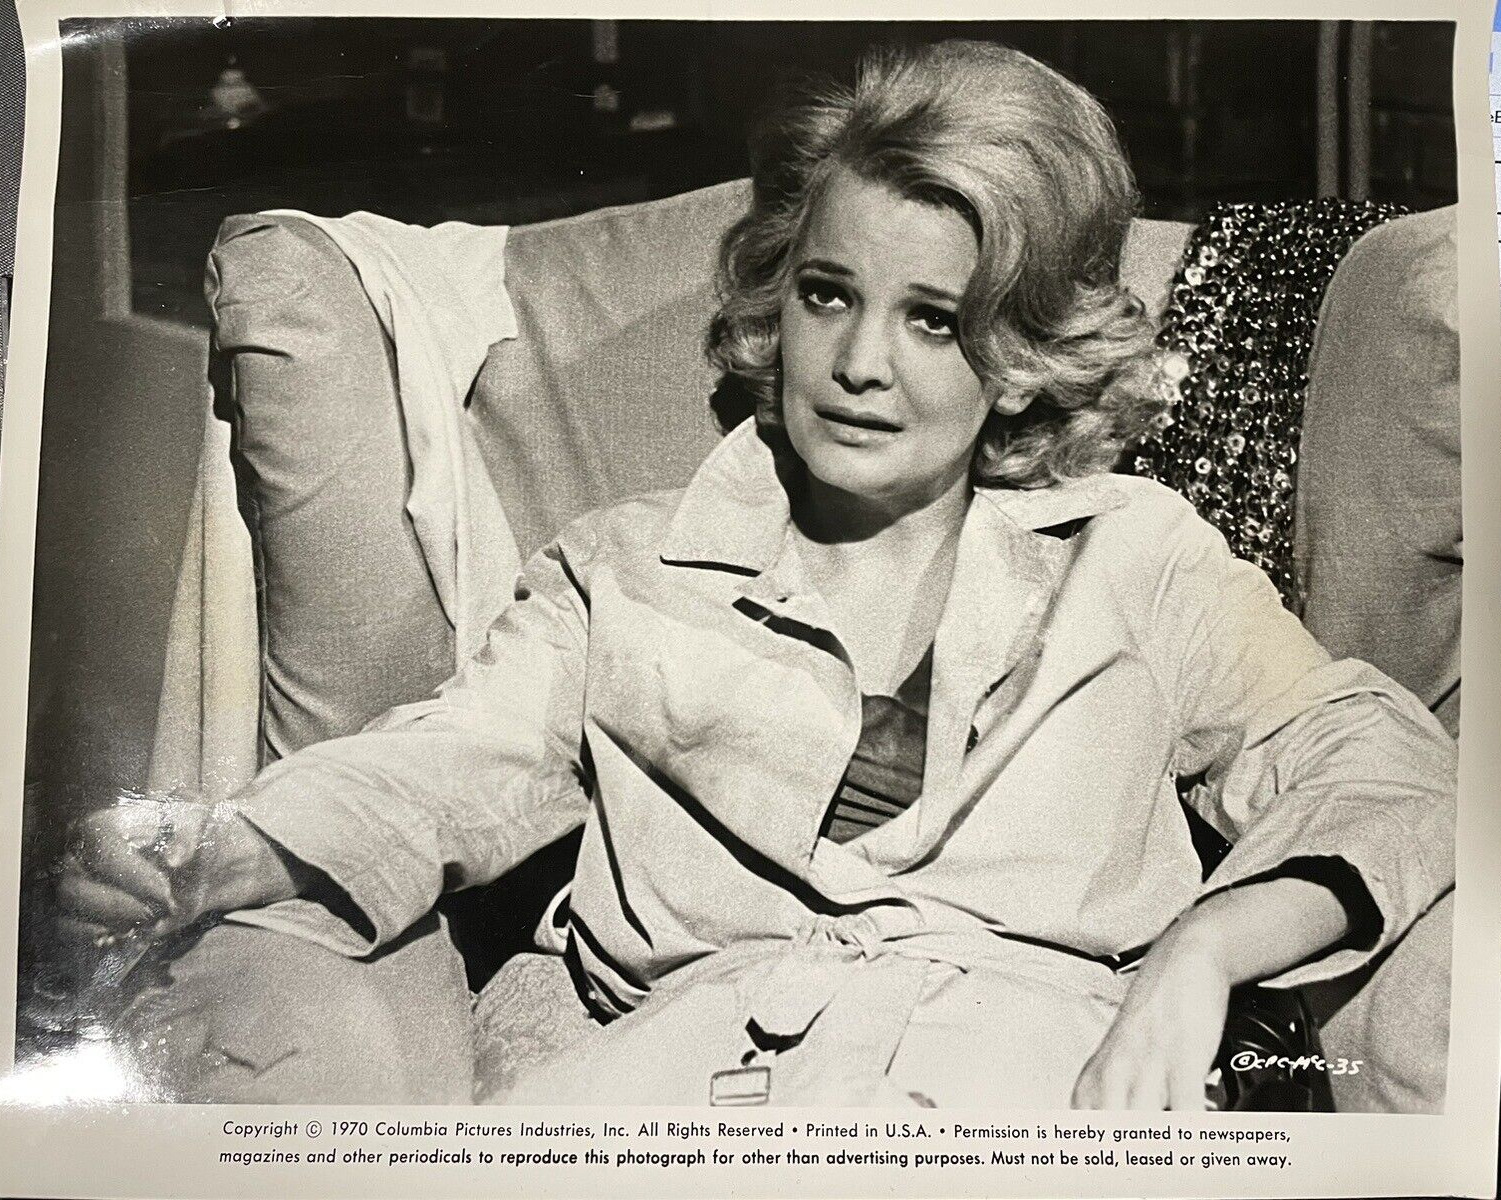 1970 Movie Press Photograph 8 x 10 Blonde Actress Columbia Pictures Industries